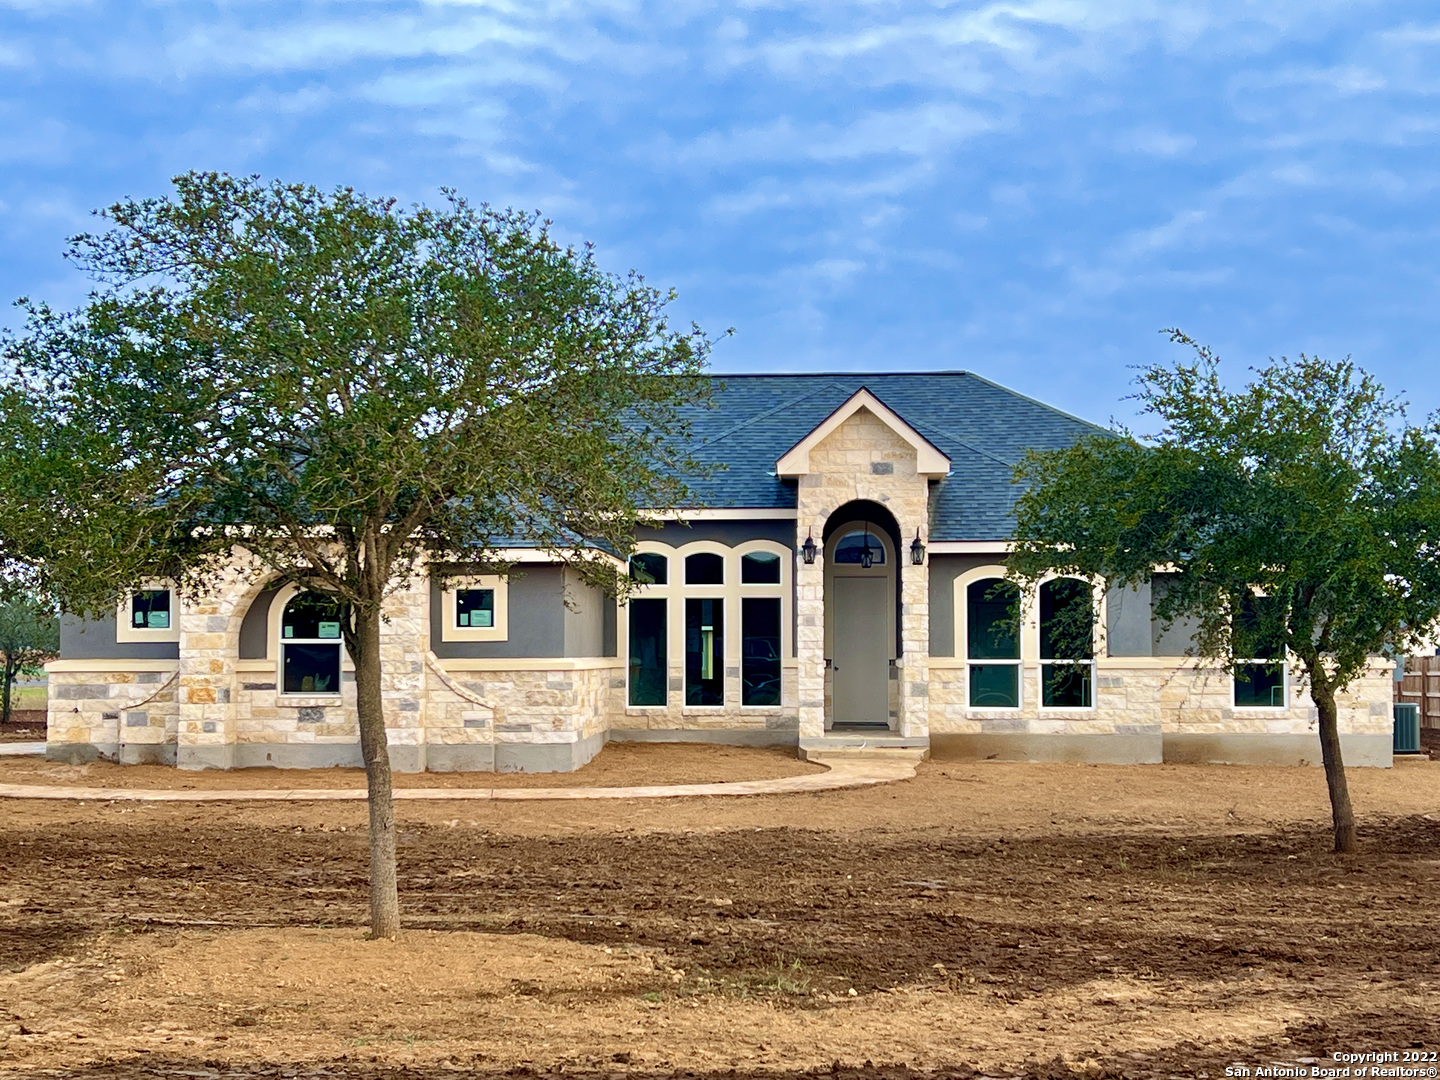 Country Living, Custom New Construction Home in The Granberg Subdivision in Lytle TX. .75Acre Lot, 4 Bedrooms, 2 Bath. 2185 Sqft. Numerous Custom Upgrades, Kitchen w/ custom cabinets & granite countertop. Master Br. w/ Large Walk-In Shower, Separate Spacious Vanities & Lg. walk-in Closet, High Custom Designed Ceilings thru-out. Open Floor Living Rm. leads to a TX Size Yard w/covered patio great for Entertaining, Secondary Bedroom can be used as Media Rm/Office. Oversized, finished & insulated 2 Car Garage can be used as home Gym or workshop. 25 minutes from Downtown San Antonio.